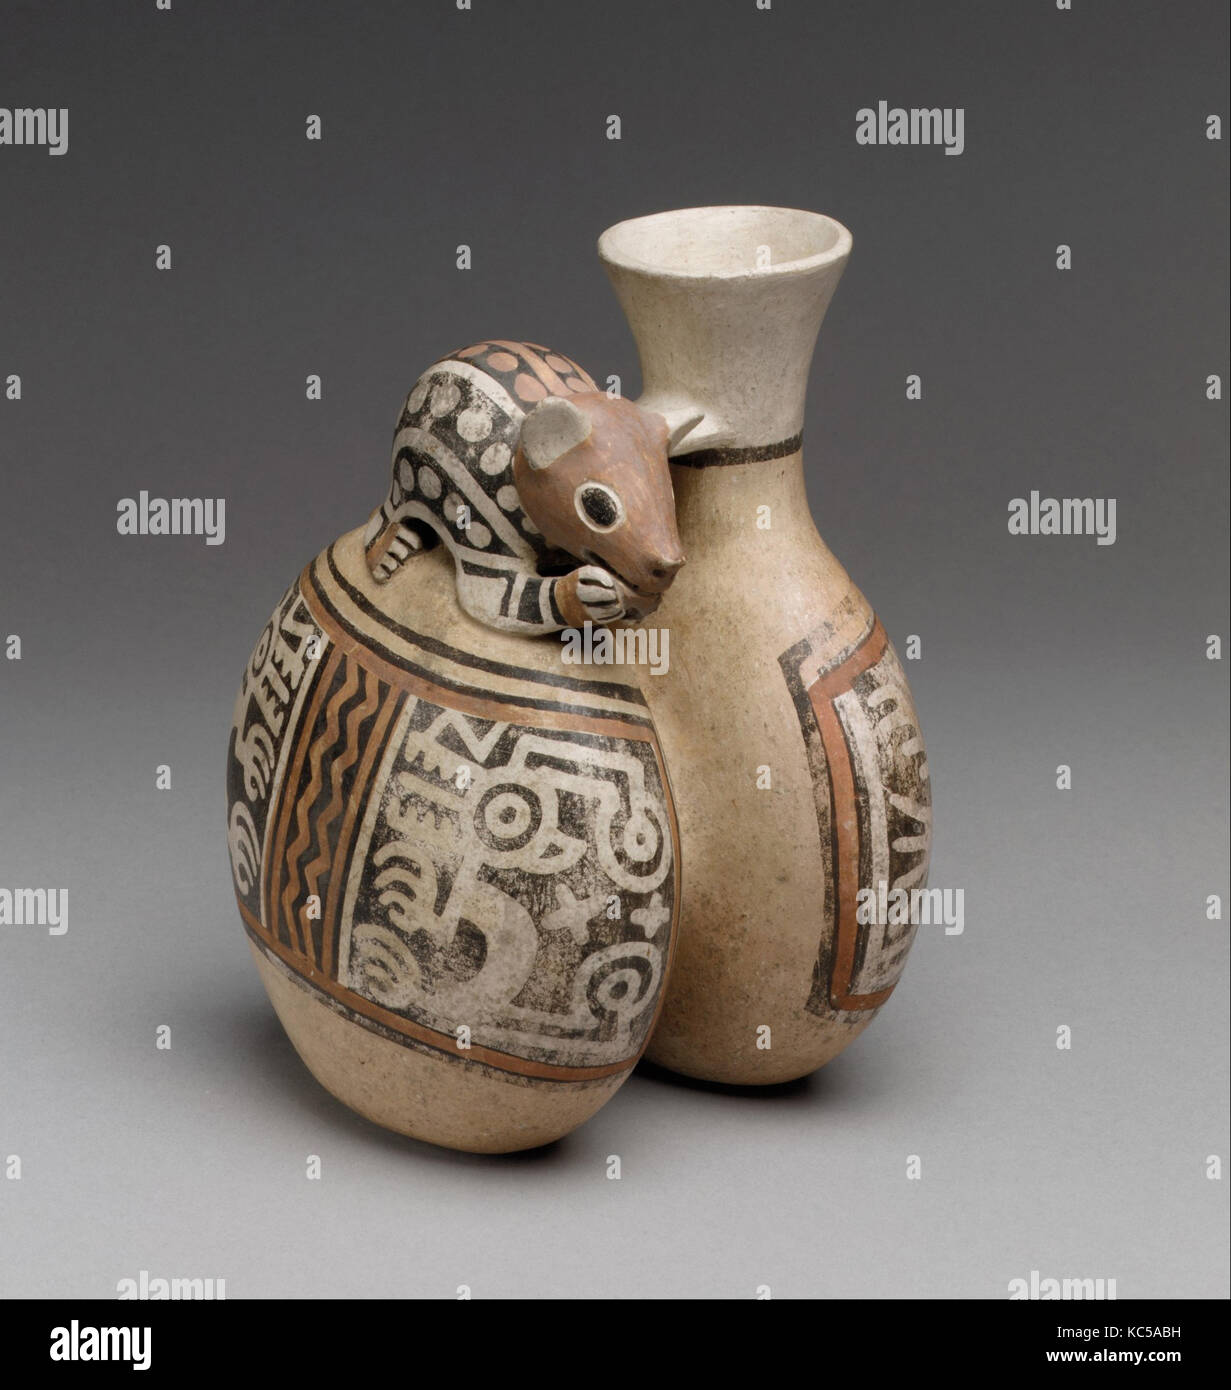 Bottle with Mouse, 4th–7th century, Peru, Recuay, Ceramic, H. 6 in. (15.24 cm), Ceramics-Containers, Contemporary with the Stock Photo